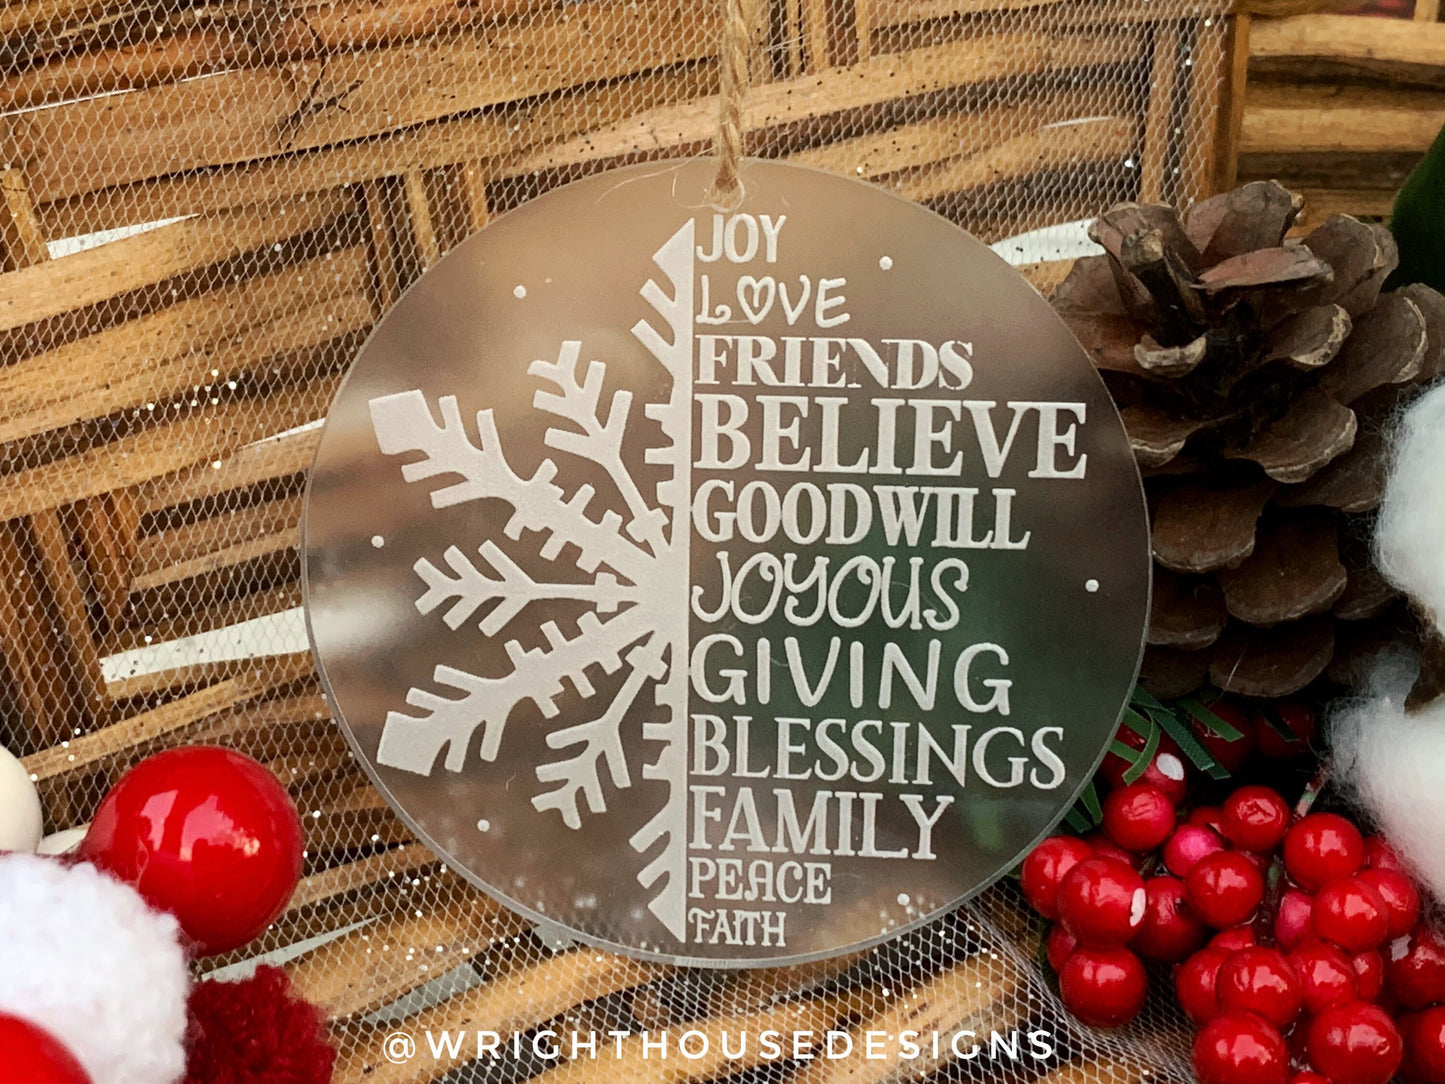 Snow Globe Snowflake - Joy Love Friends Believe - Laser Engraved Frosted Acrylic Christmas Tree Ornament